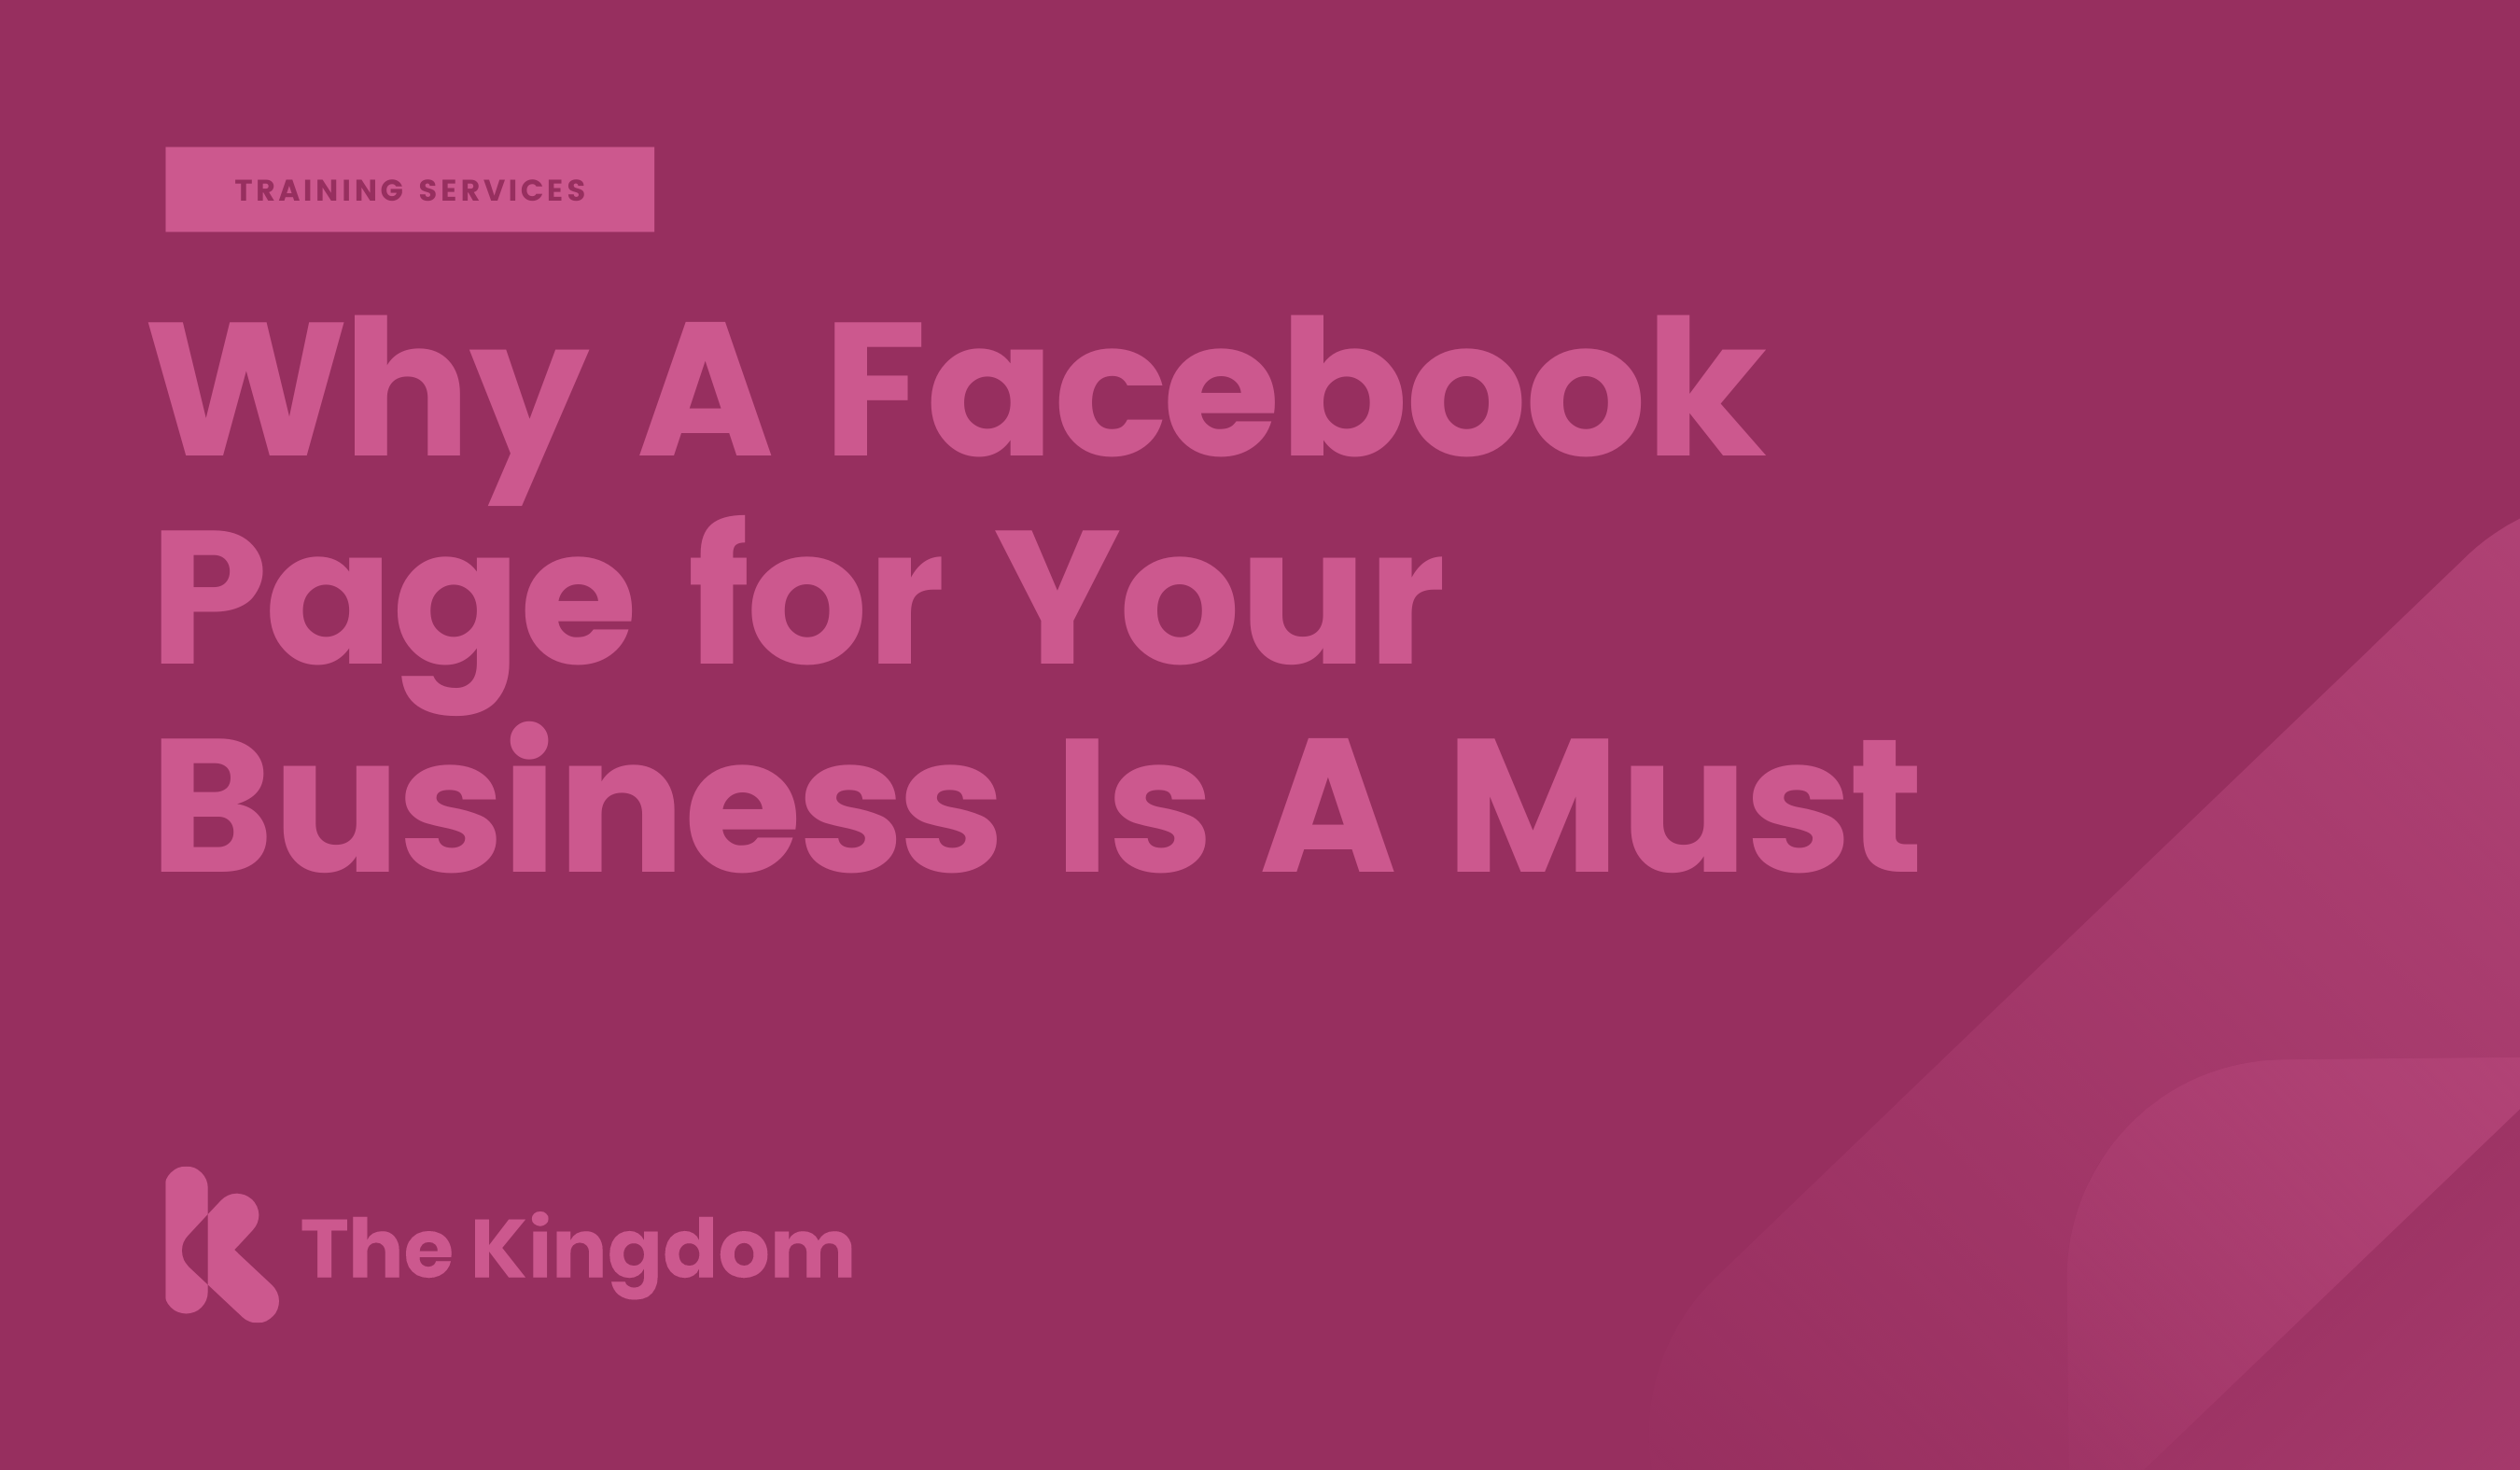 Why A Facebook Page for Your Business Is A Must